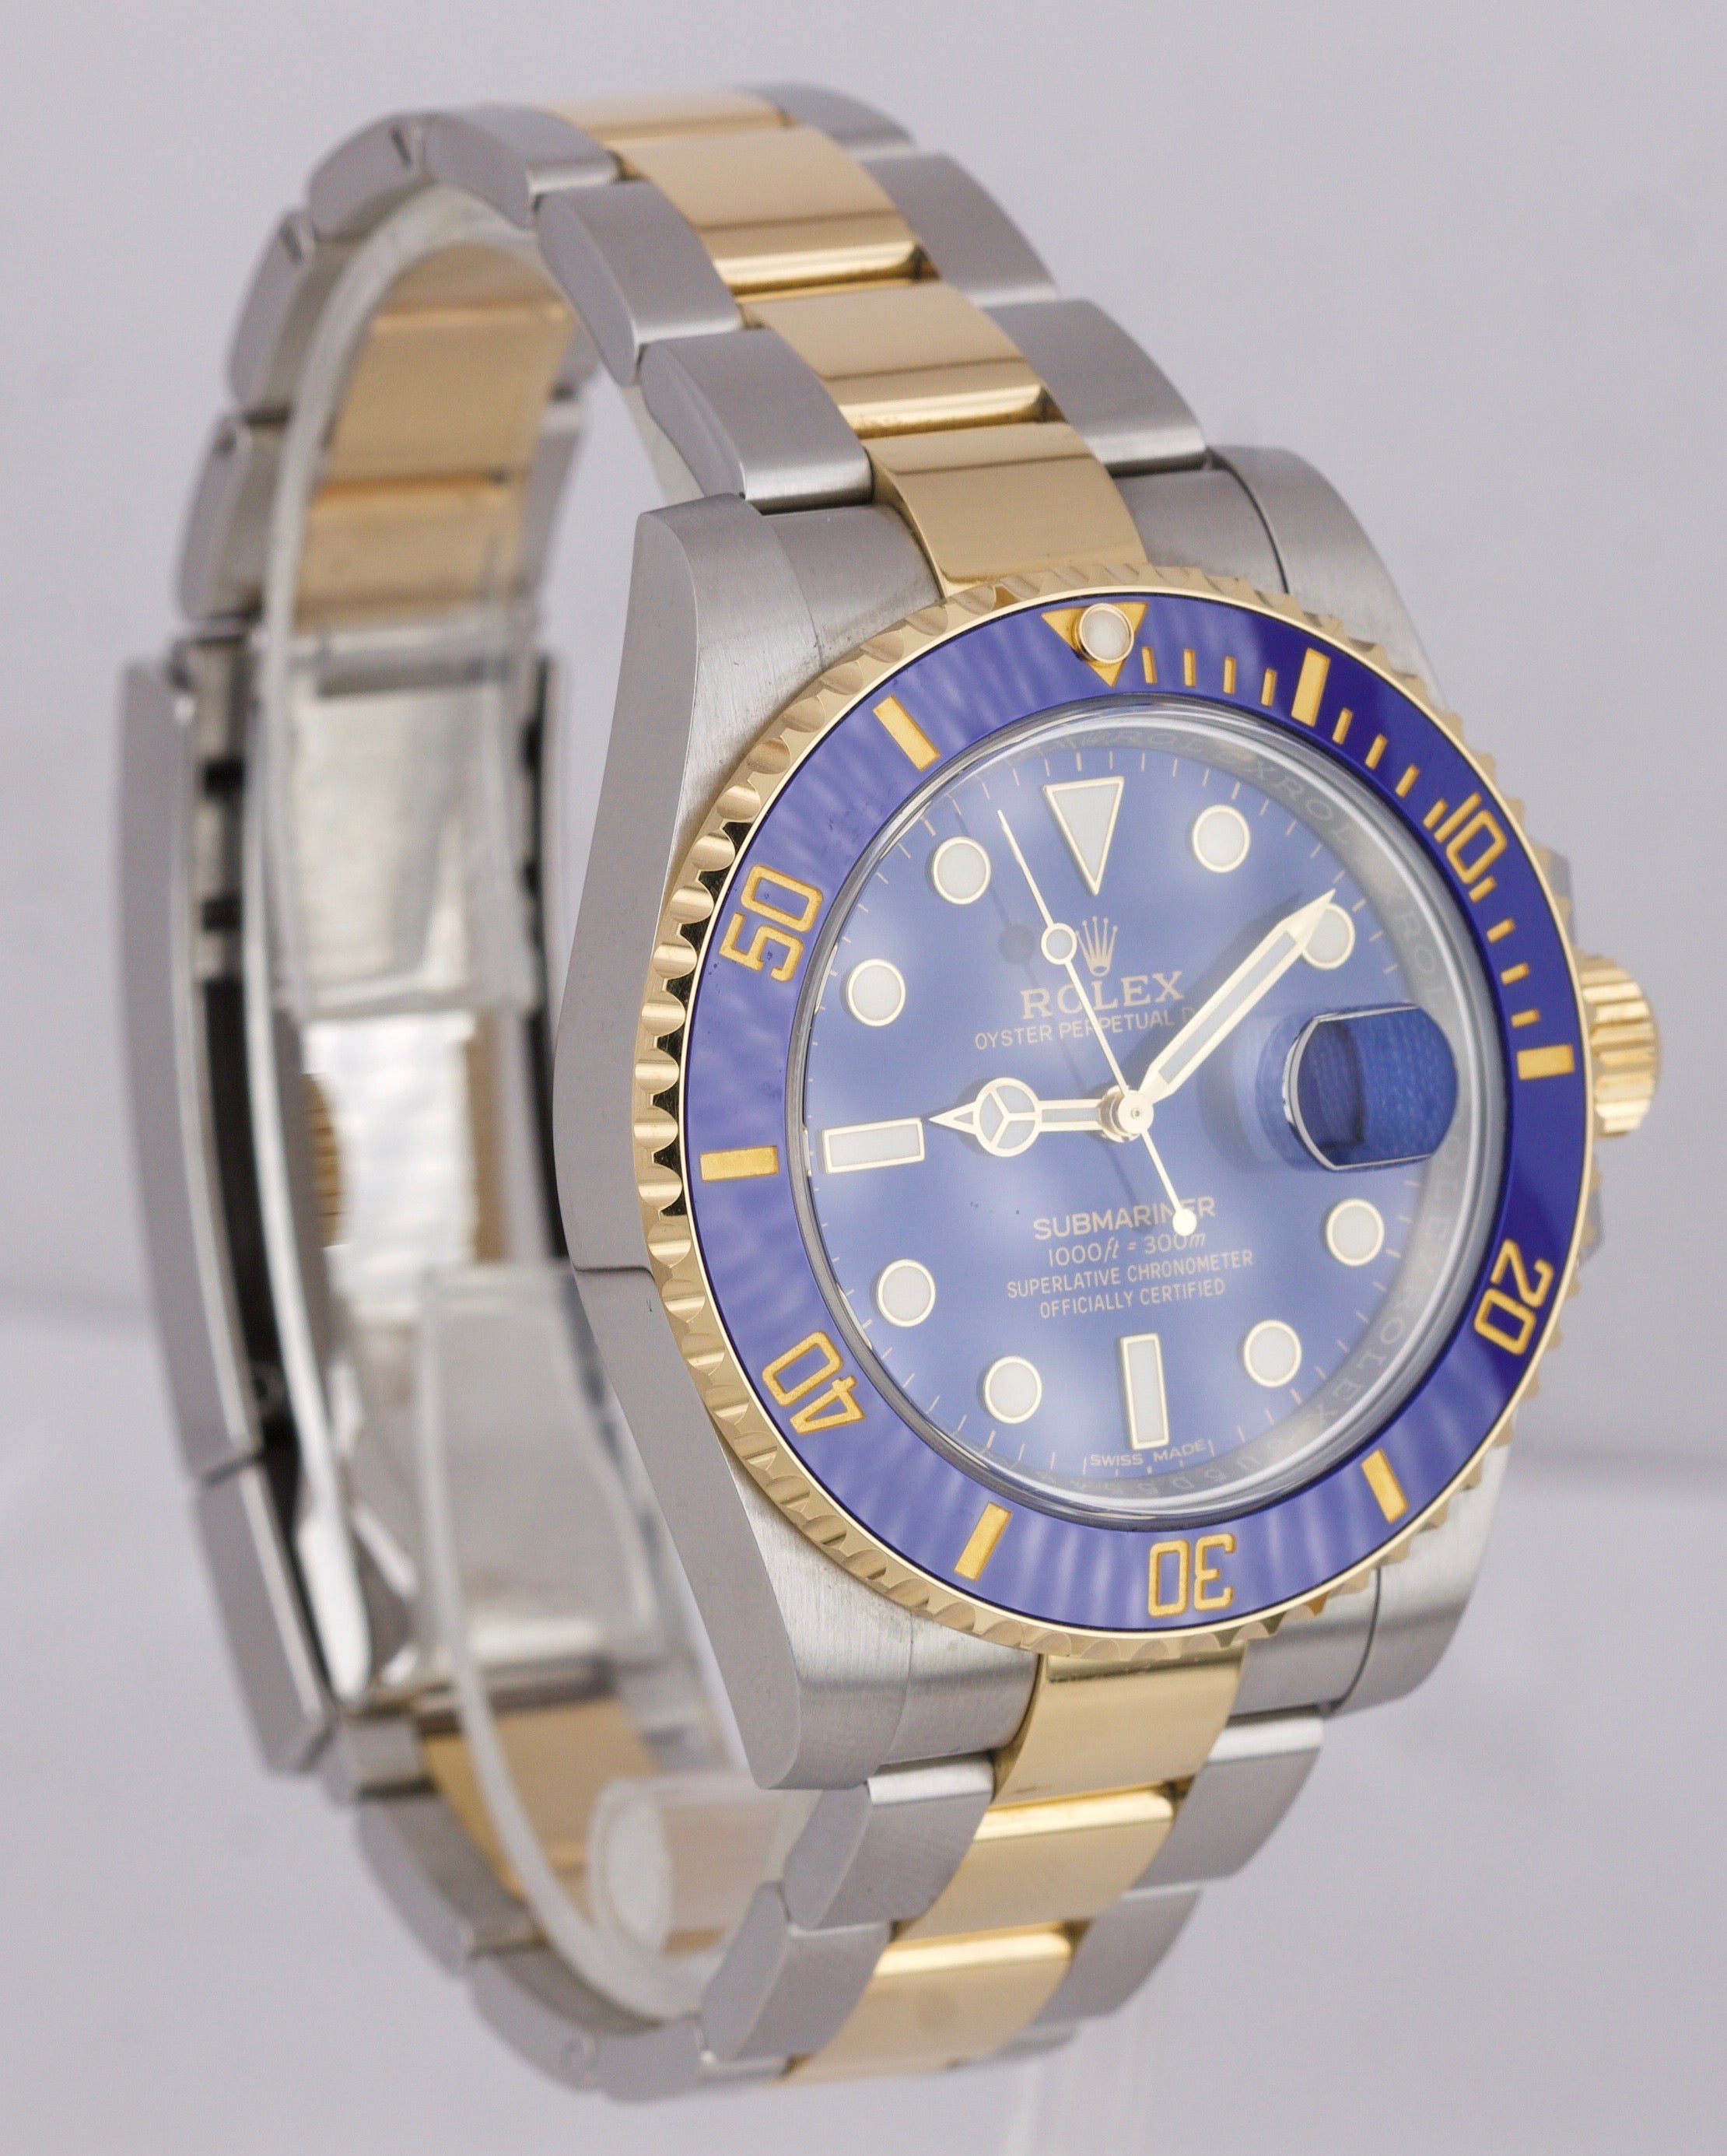 2019 Rolex Submariner Date Ceramic Two-Tone Stainless Gold Blue Watch 116613 LB